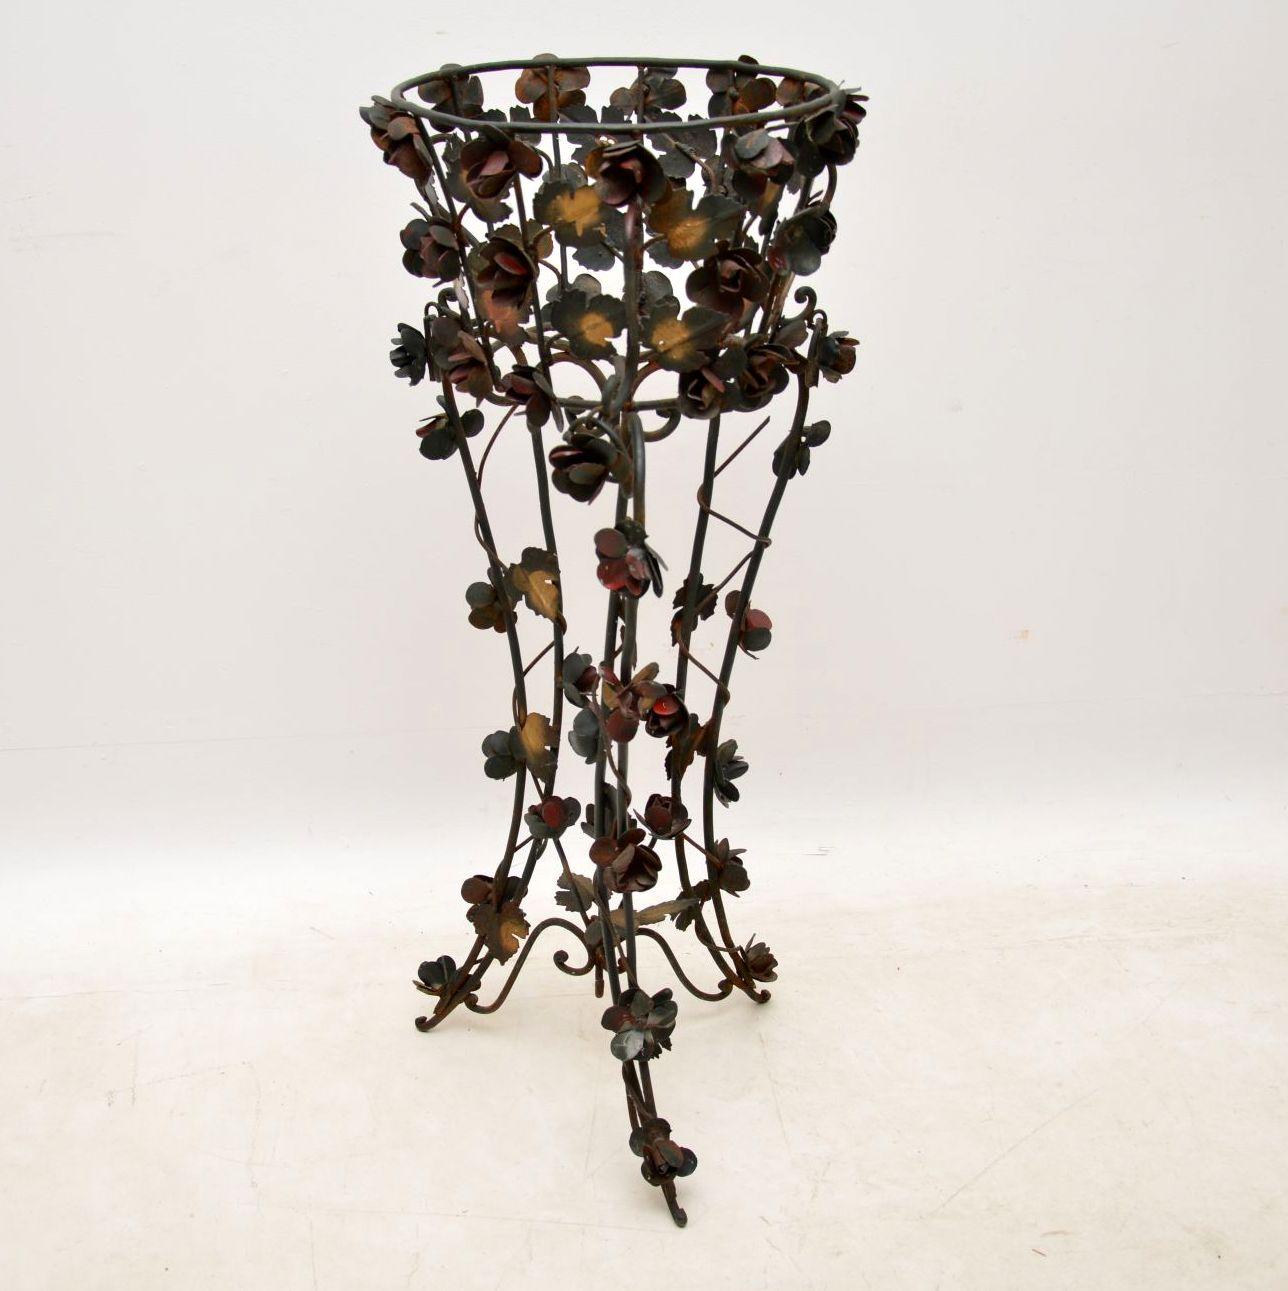 This antique painted wrought iron plant stand has fabulous floral decoration all over and is still in good original condition. The painting too is all original and hasn’t been touched up. It was very dirty when we picked it up and when we cleaned it